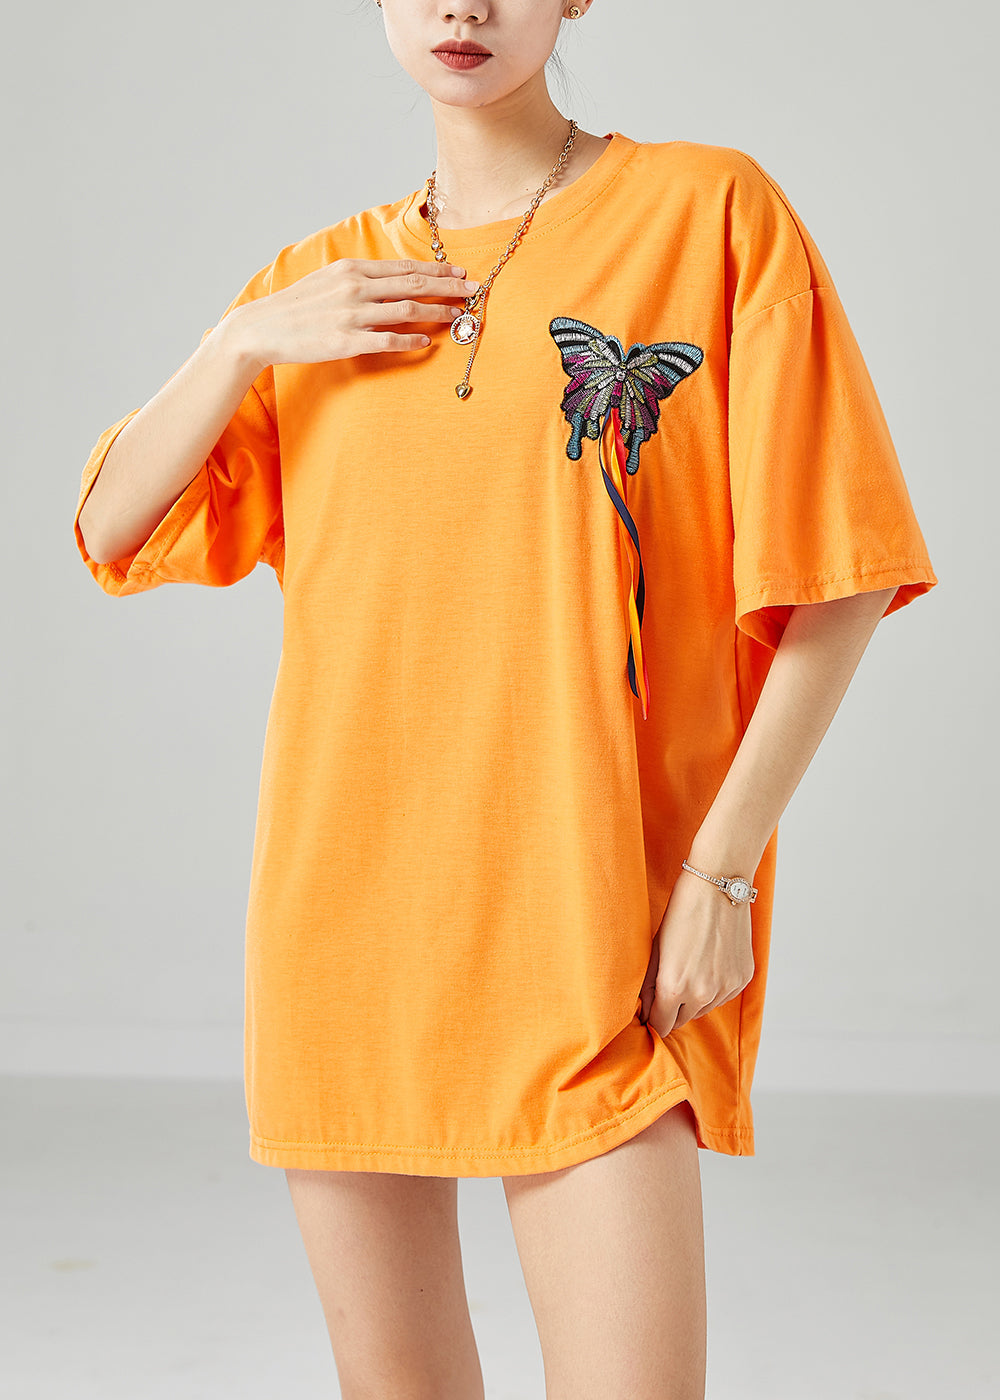 Simple Orange Embroideried Butterfly Tassel Cotton Tank Summer LY6701 - fabuloryshop